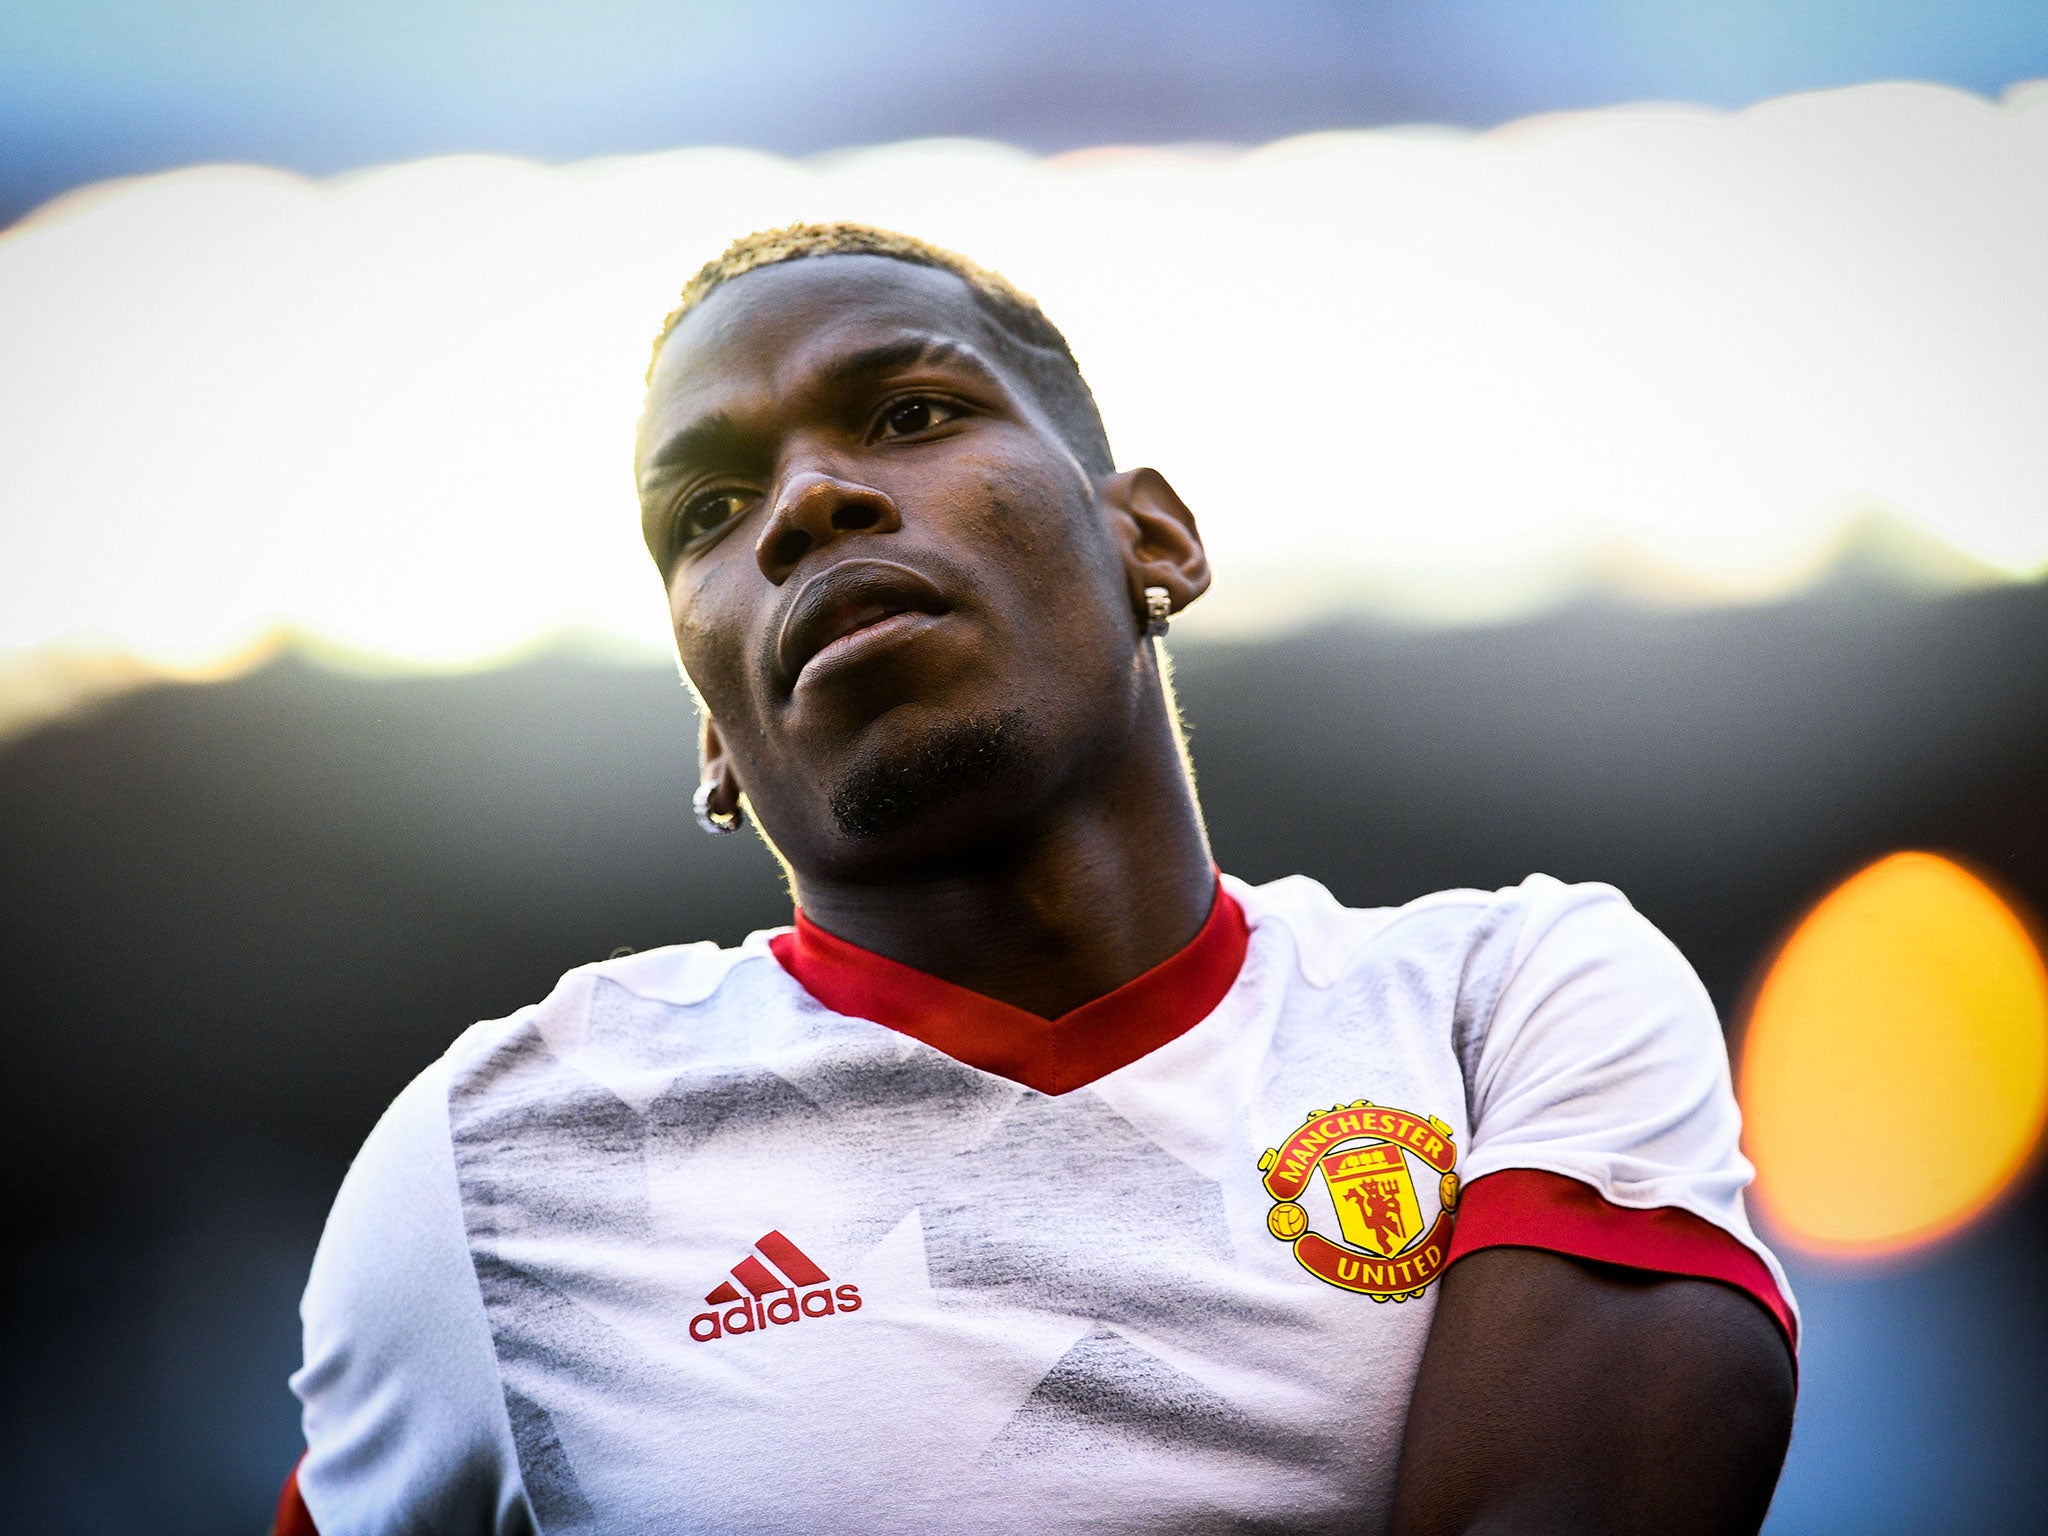 Paul Pogba will miss Manchester United's penultimate Premier League match after the death of his father